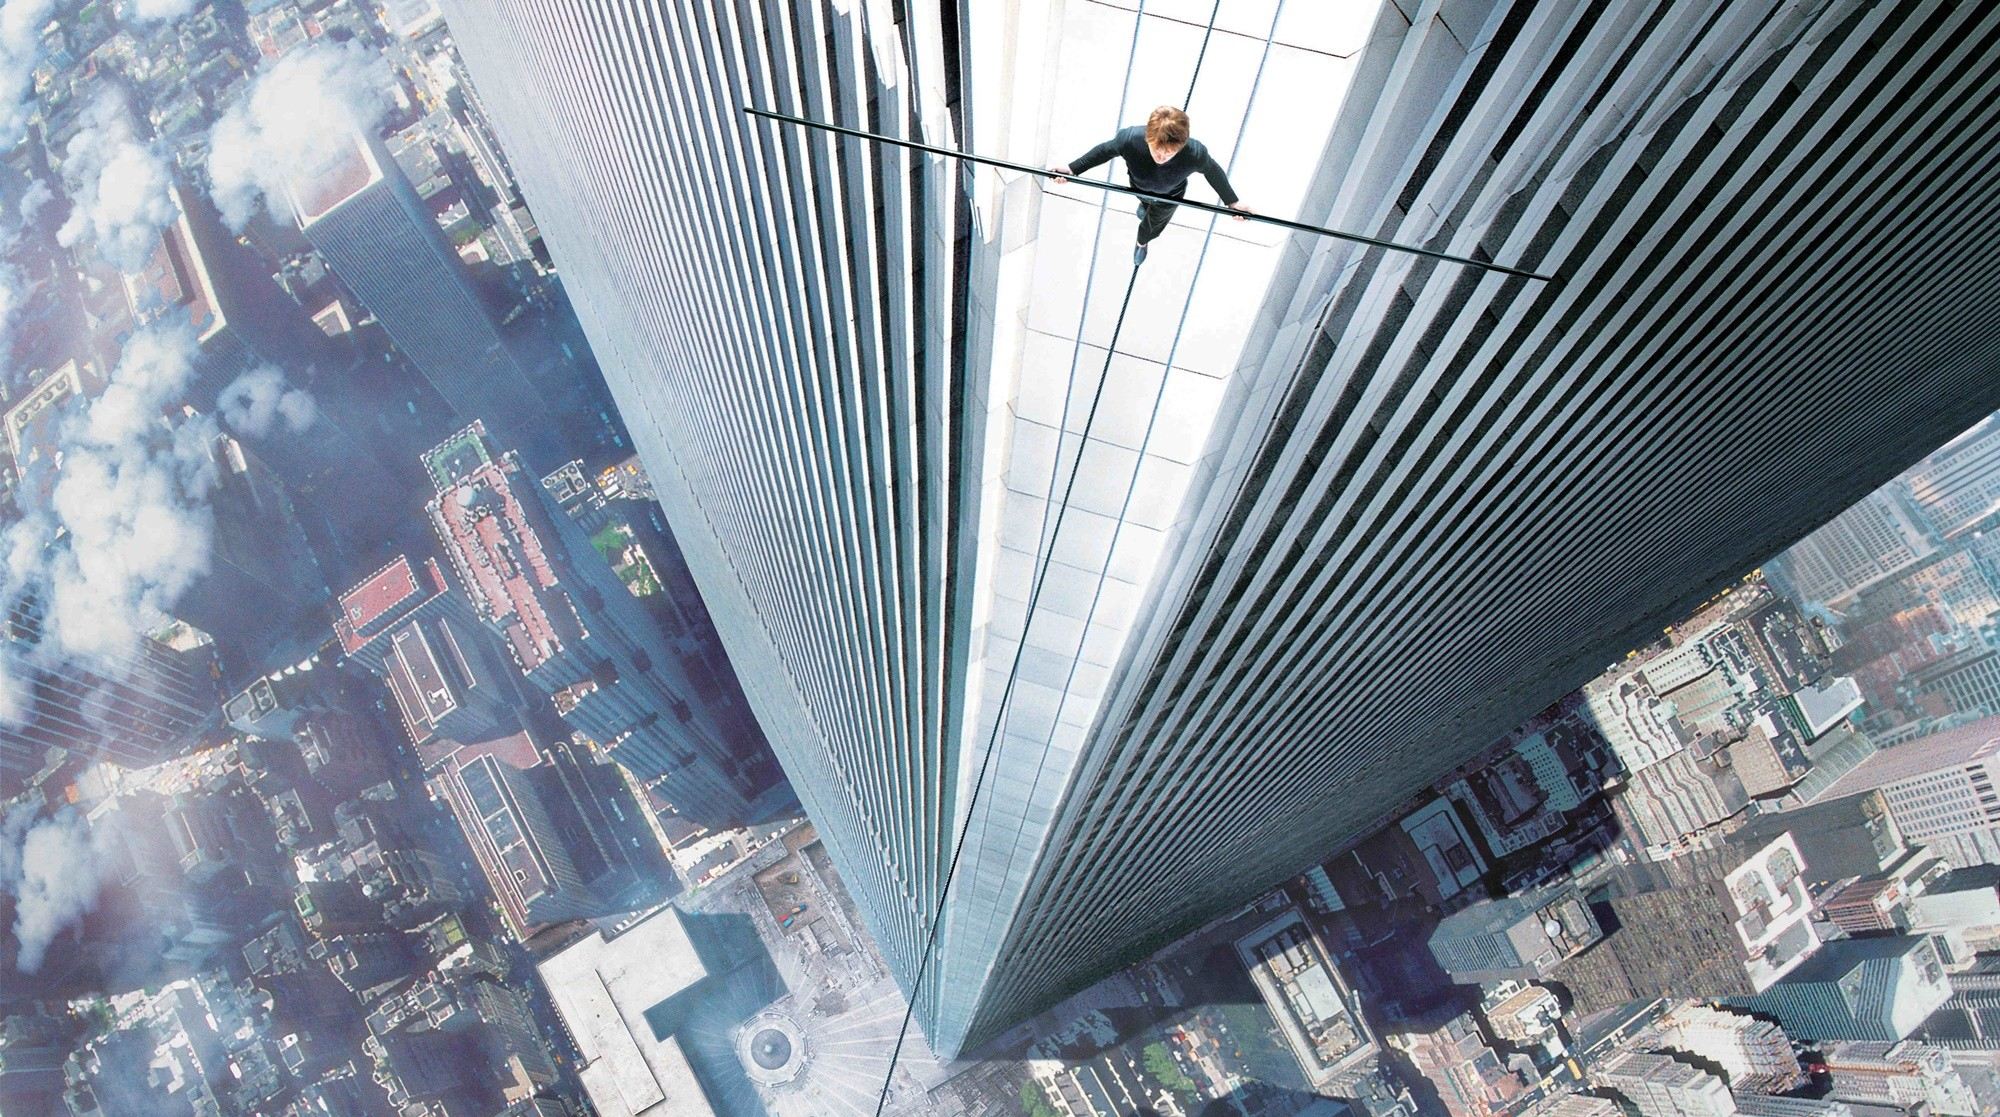 A scene from TriStar Pictures' The Walk (2015)